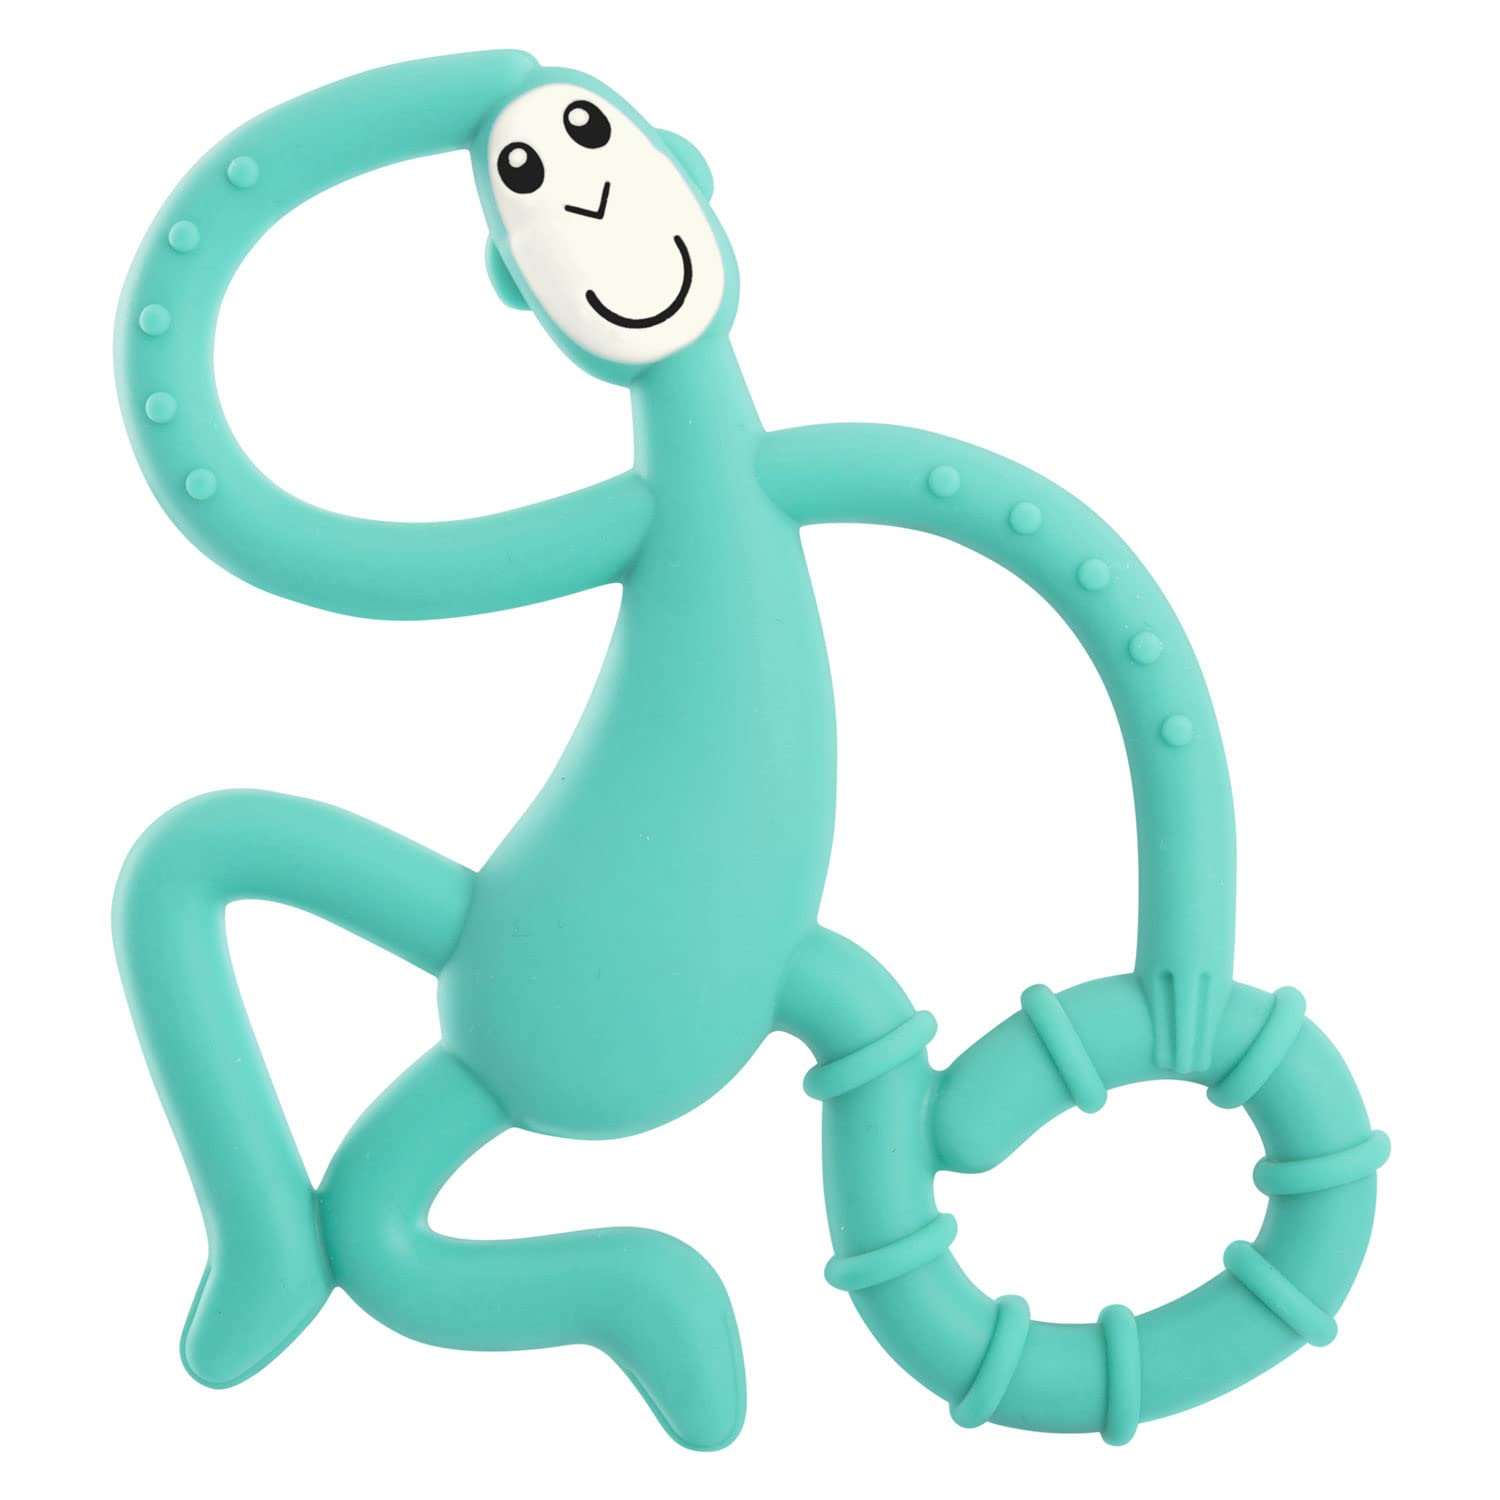 HOPOP Soft Silicone Monkey Shaped Silicone Teether For Babies - Green 4m+